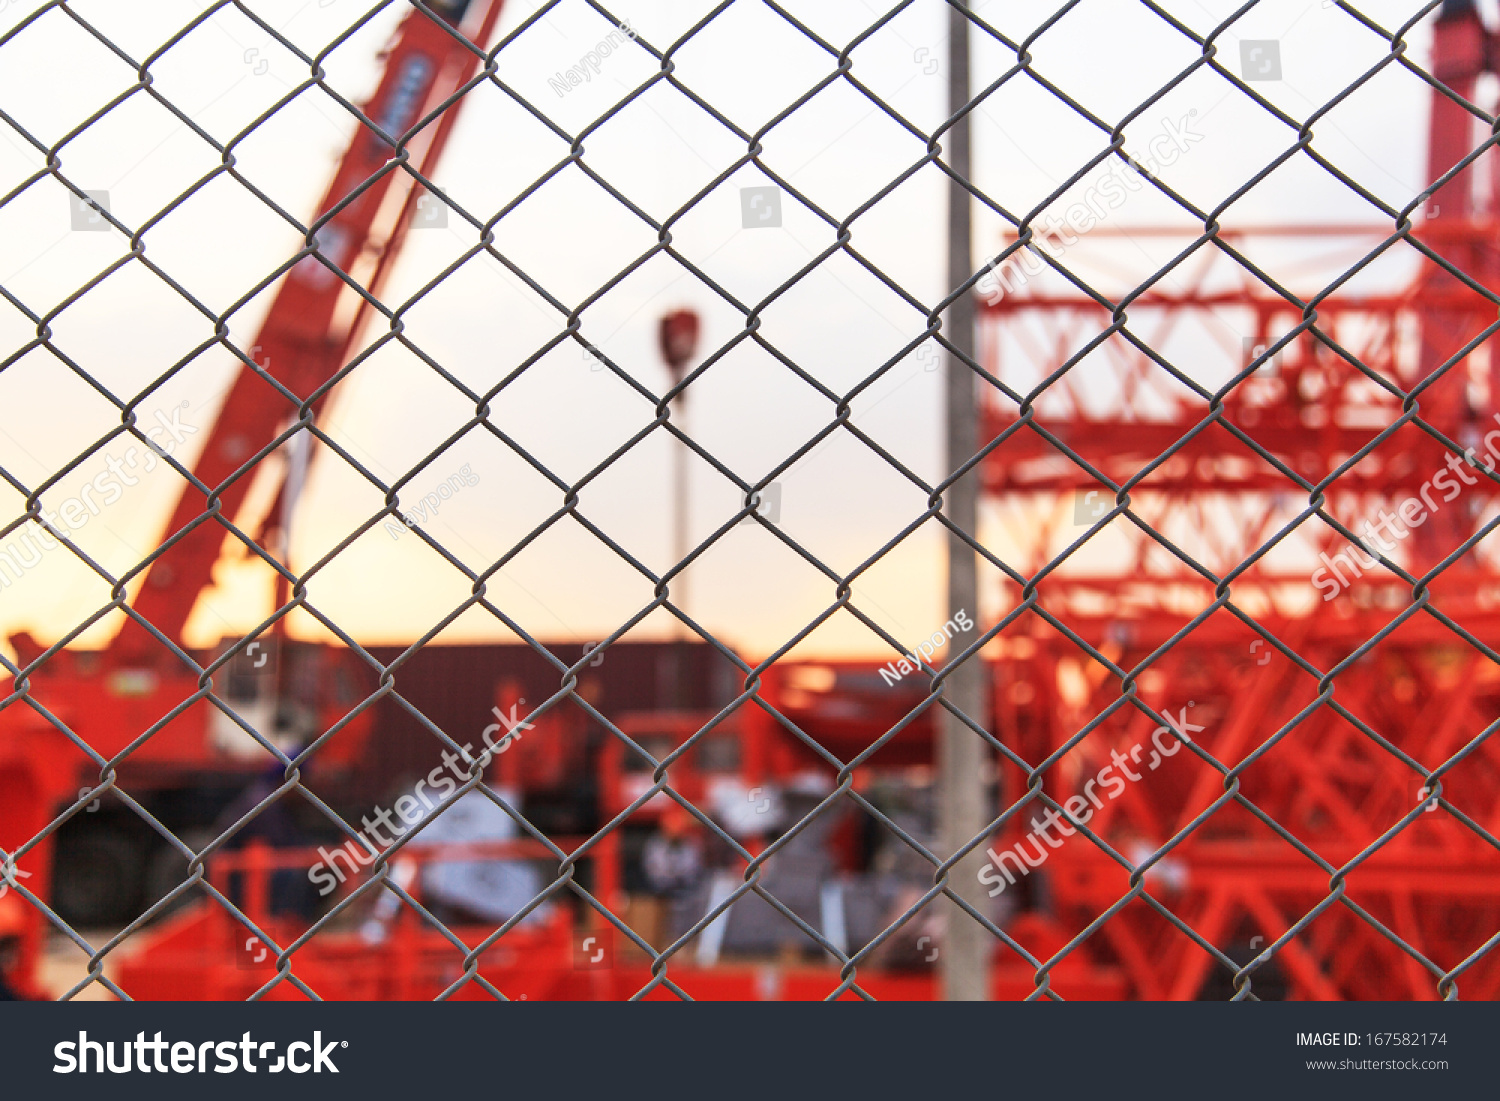 Stock Photo Metal Fence At Construction Site 167582174 